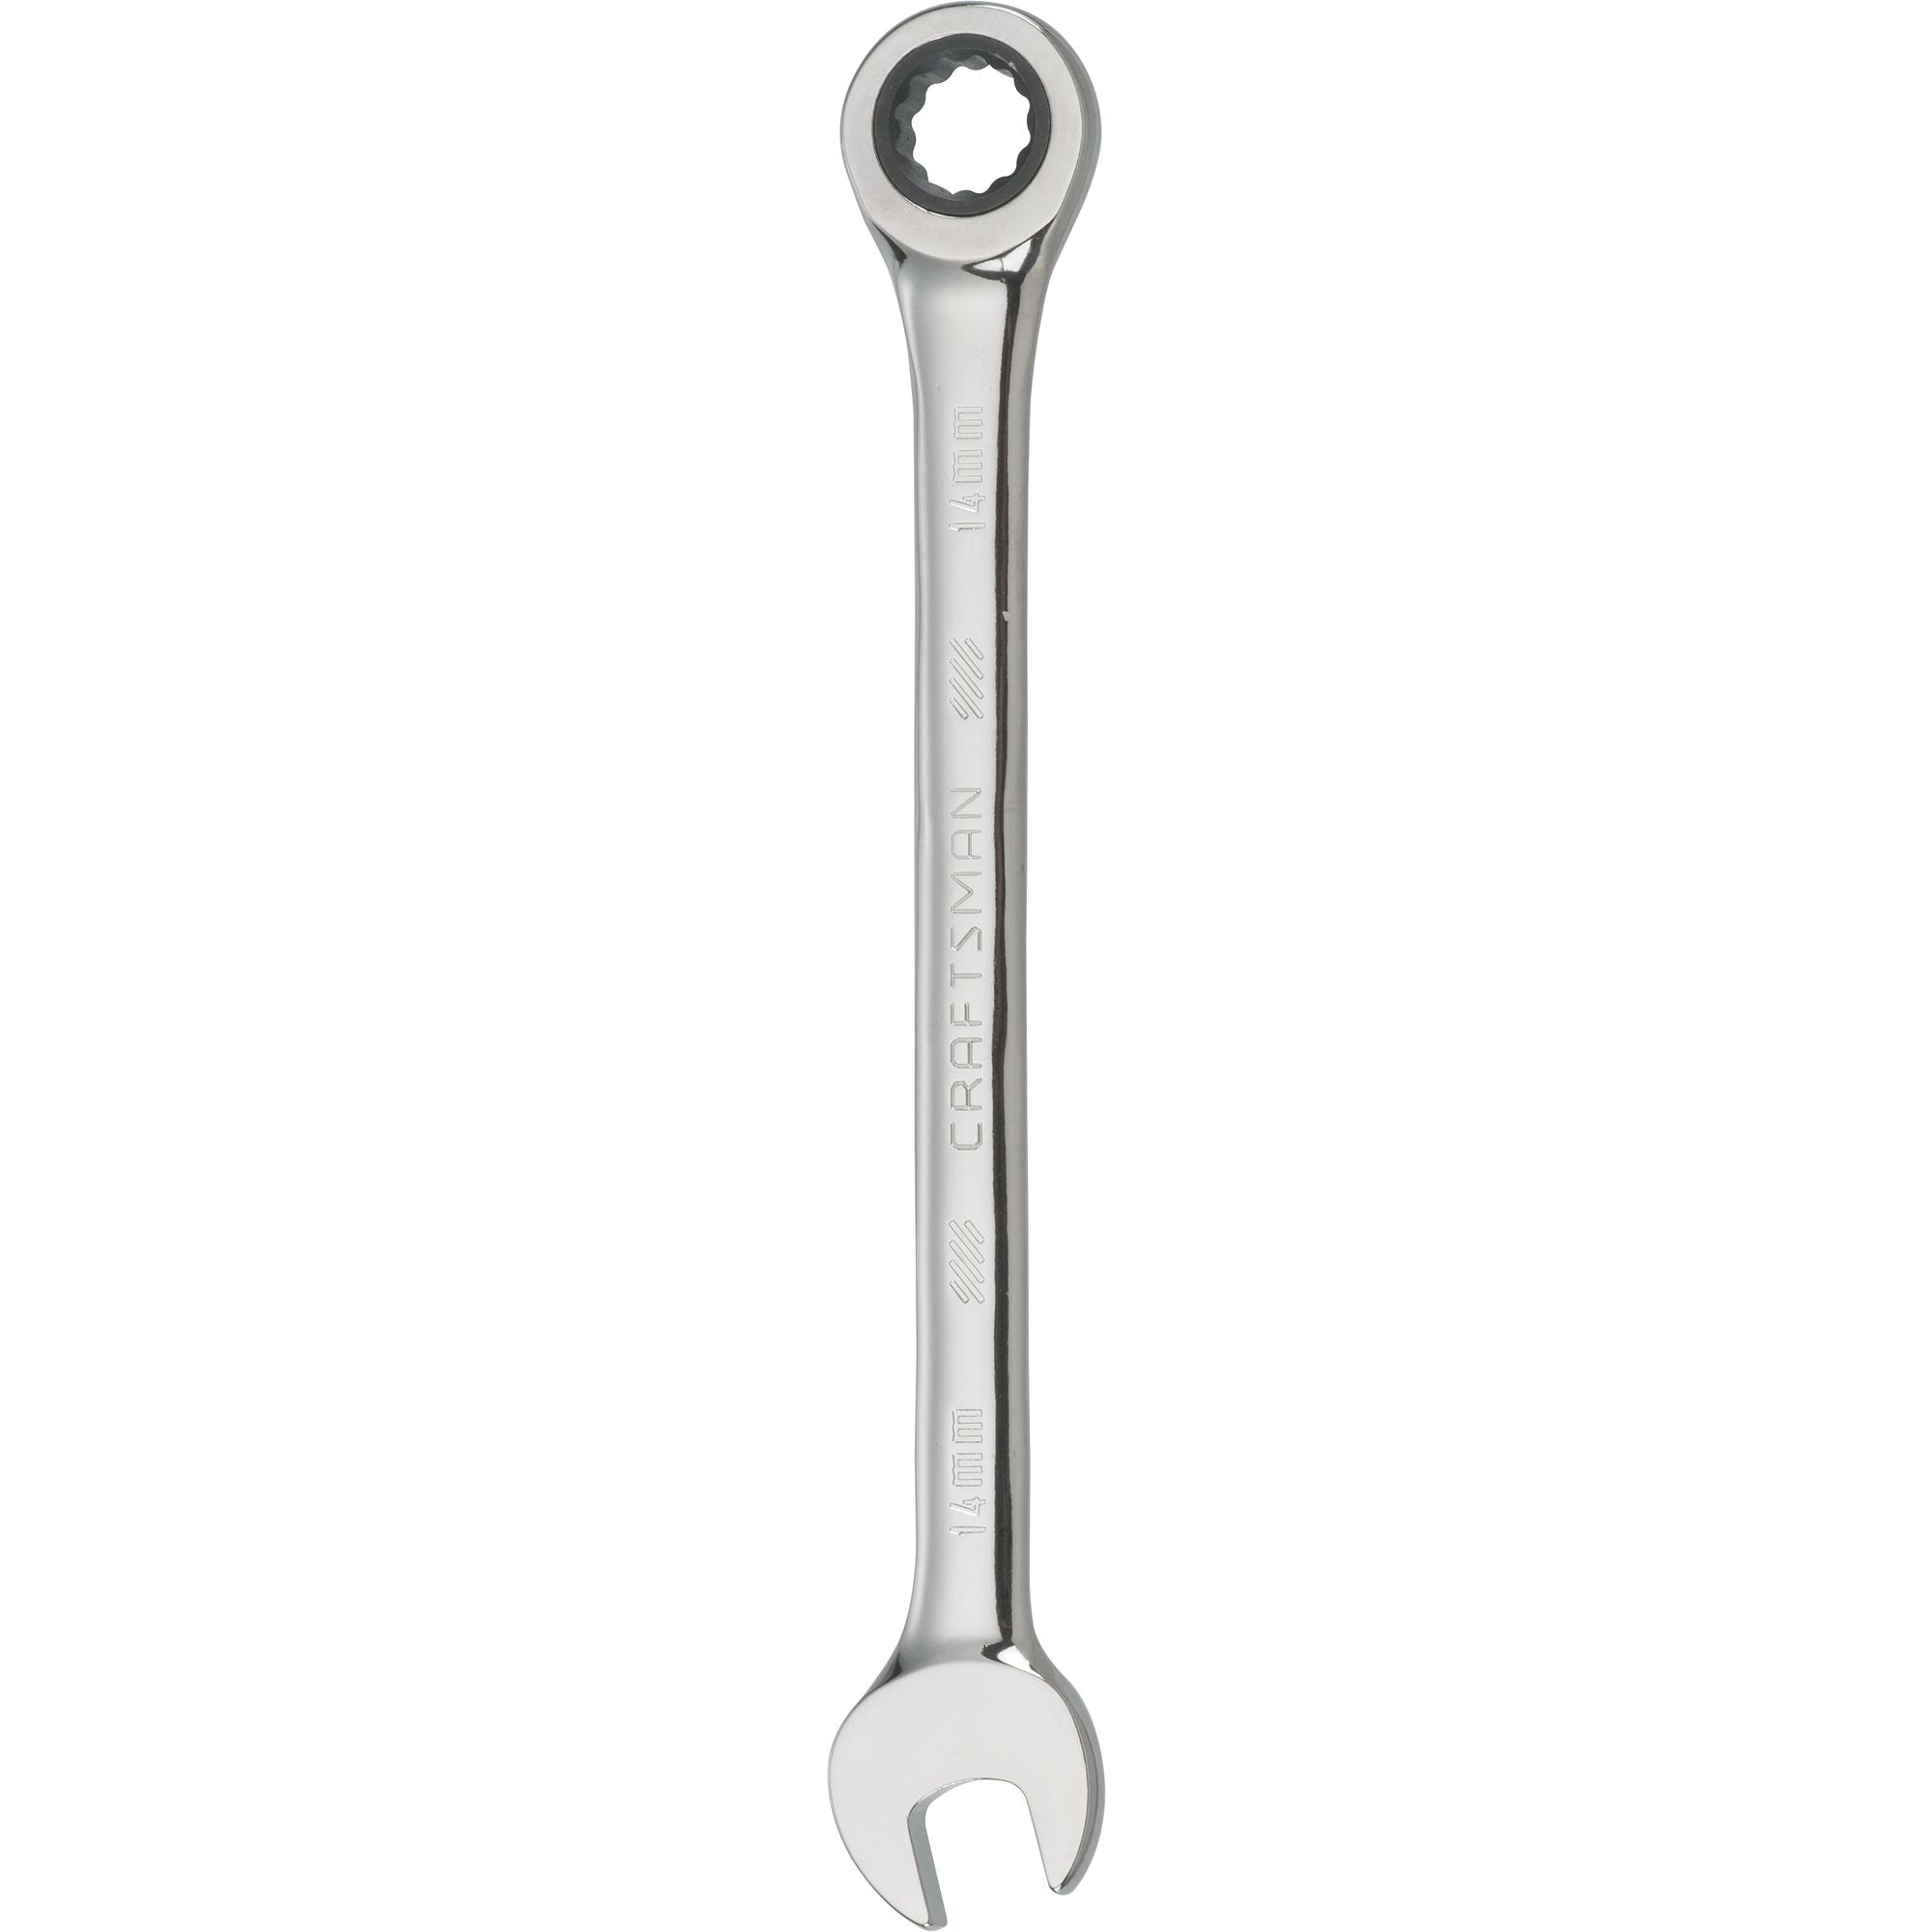 14mm 72 Tooth 12 Point Metric Ratcheting Wrench | CRAFTSMAN